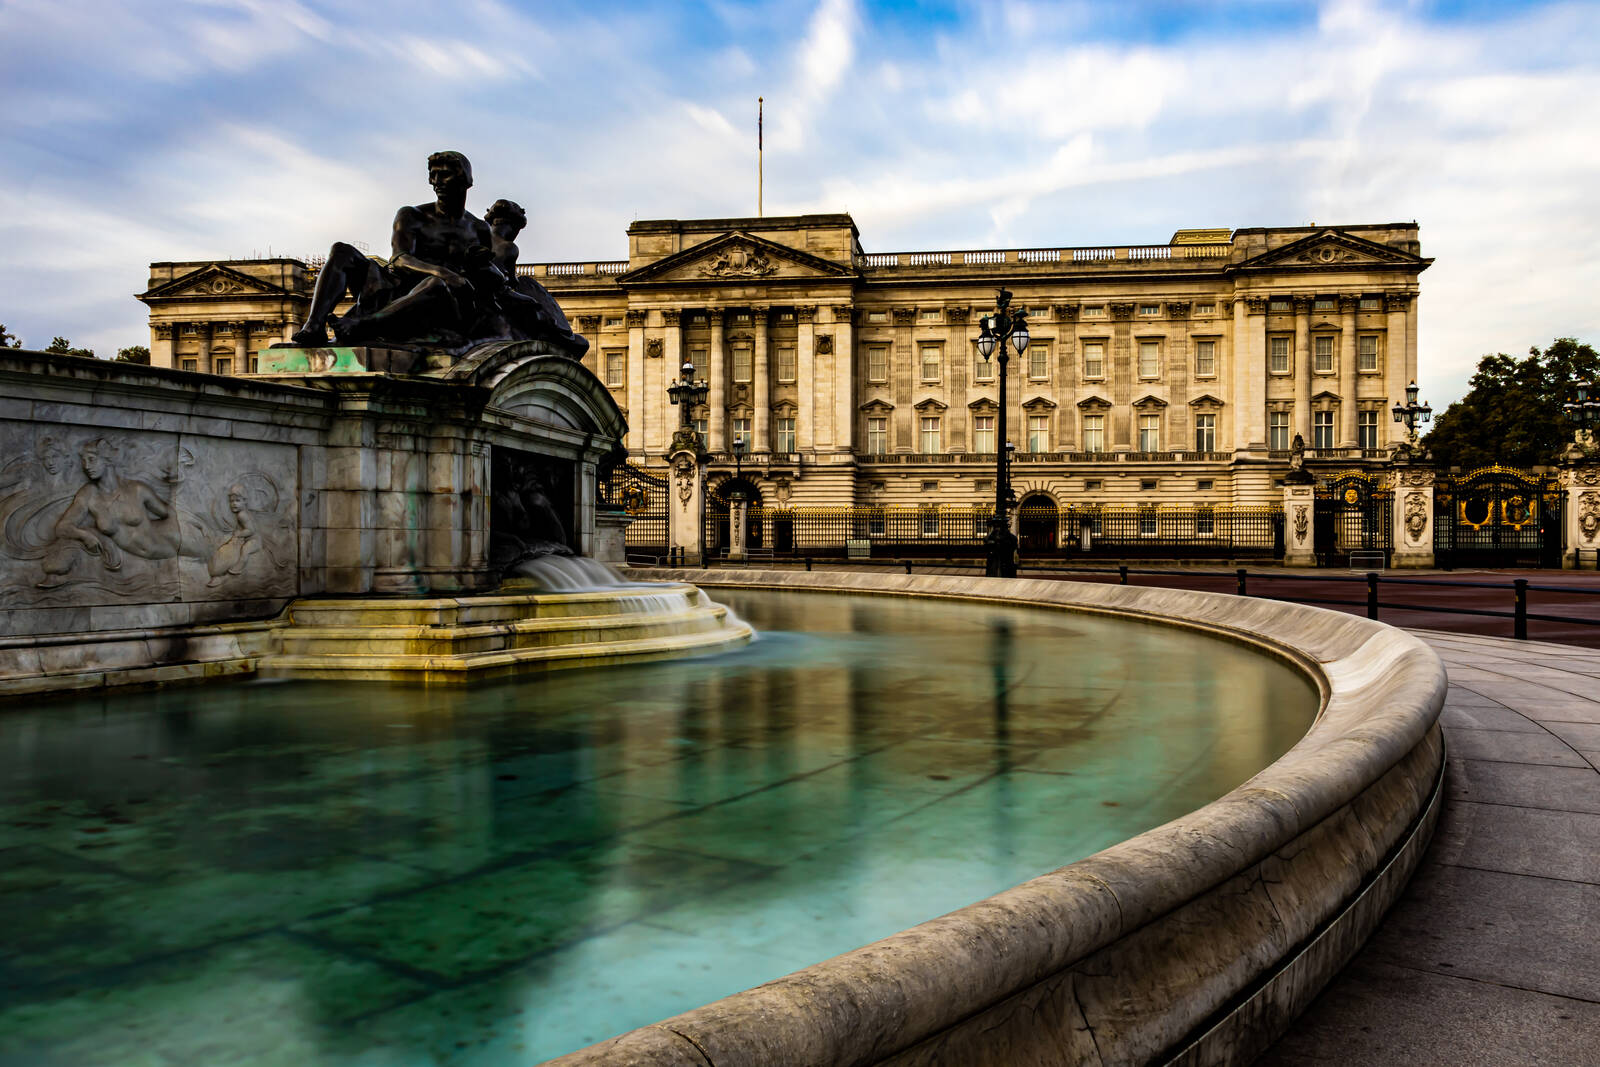 Image of Buckingham Palace by AS 303